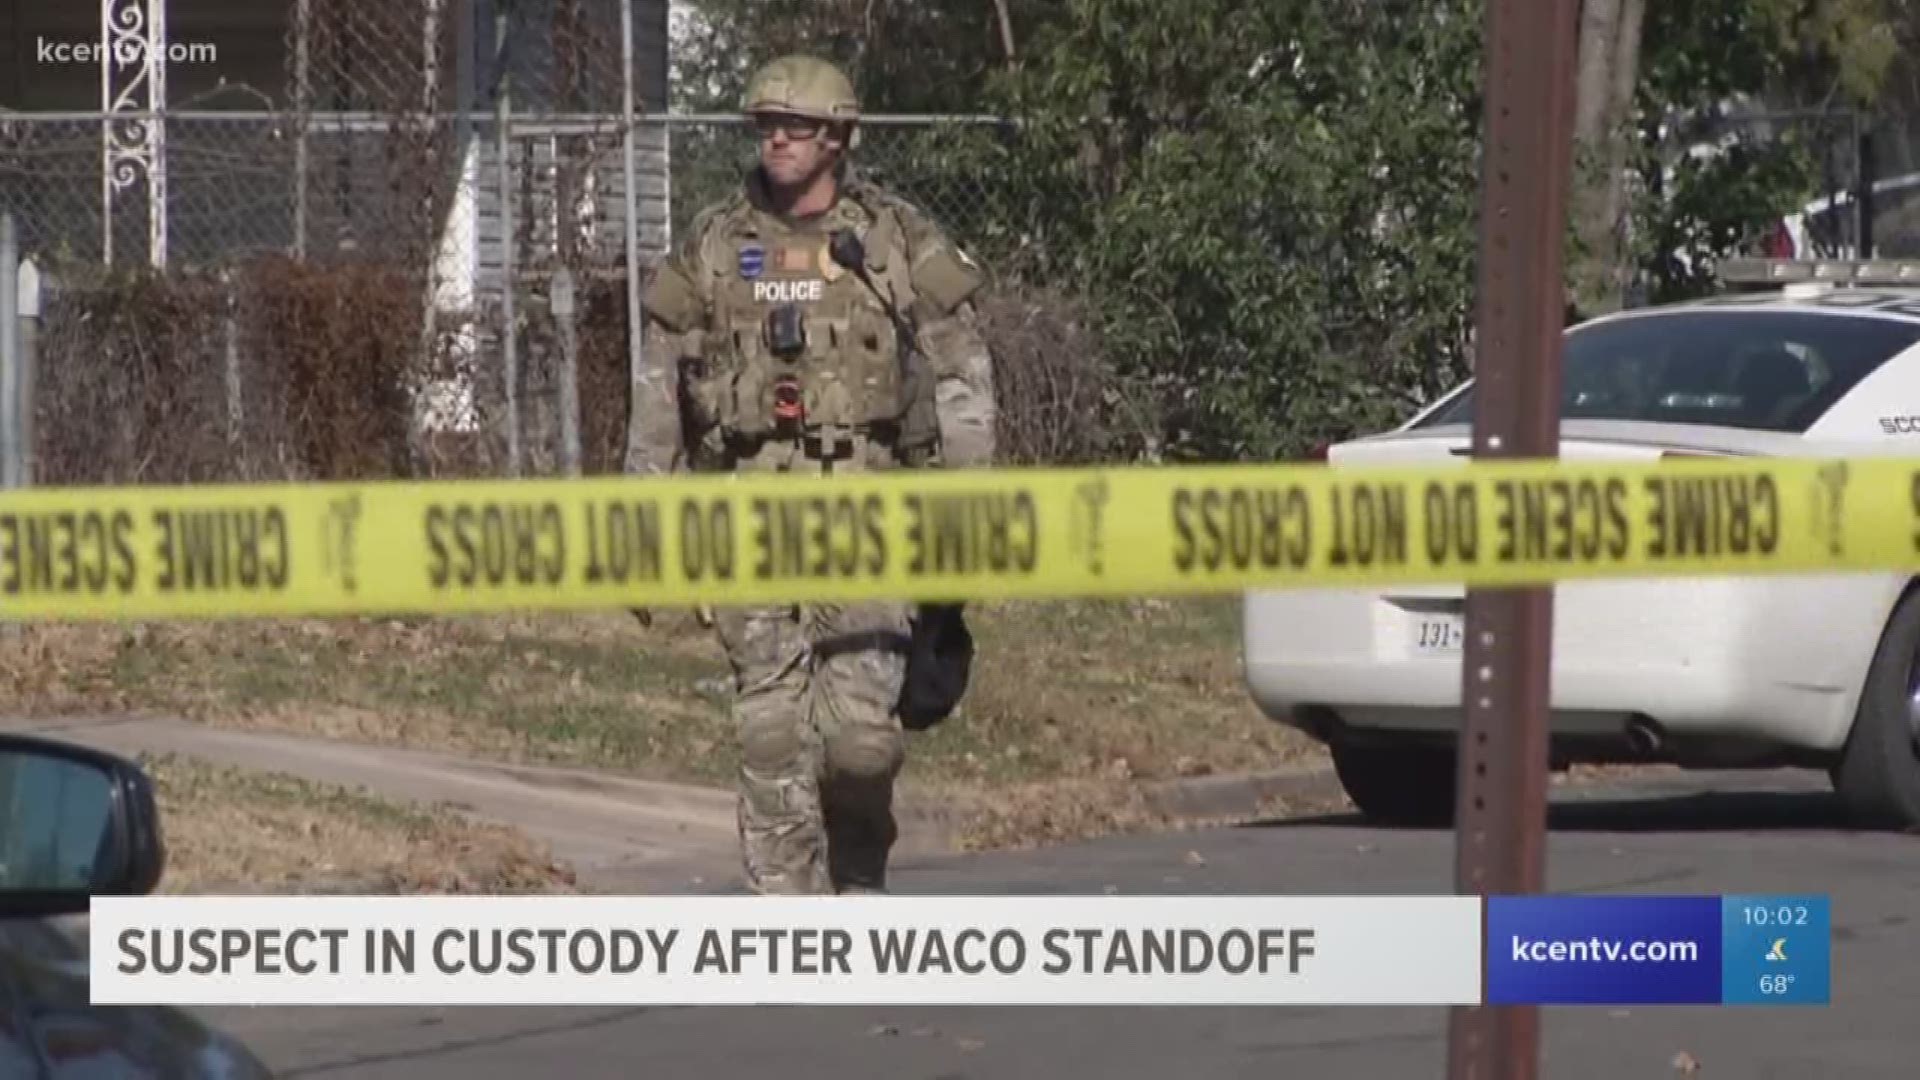 Waco police threw tear gas into a house during a standoff that lasted several hours. Police didn't find the suspect until they did a secondary search.